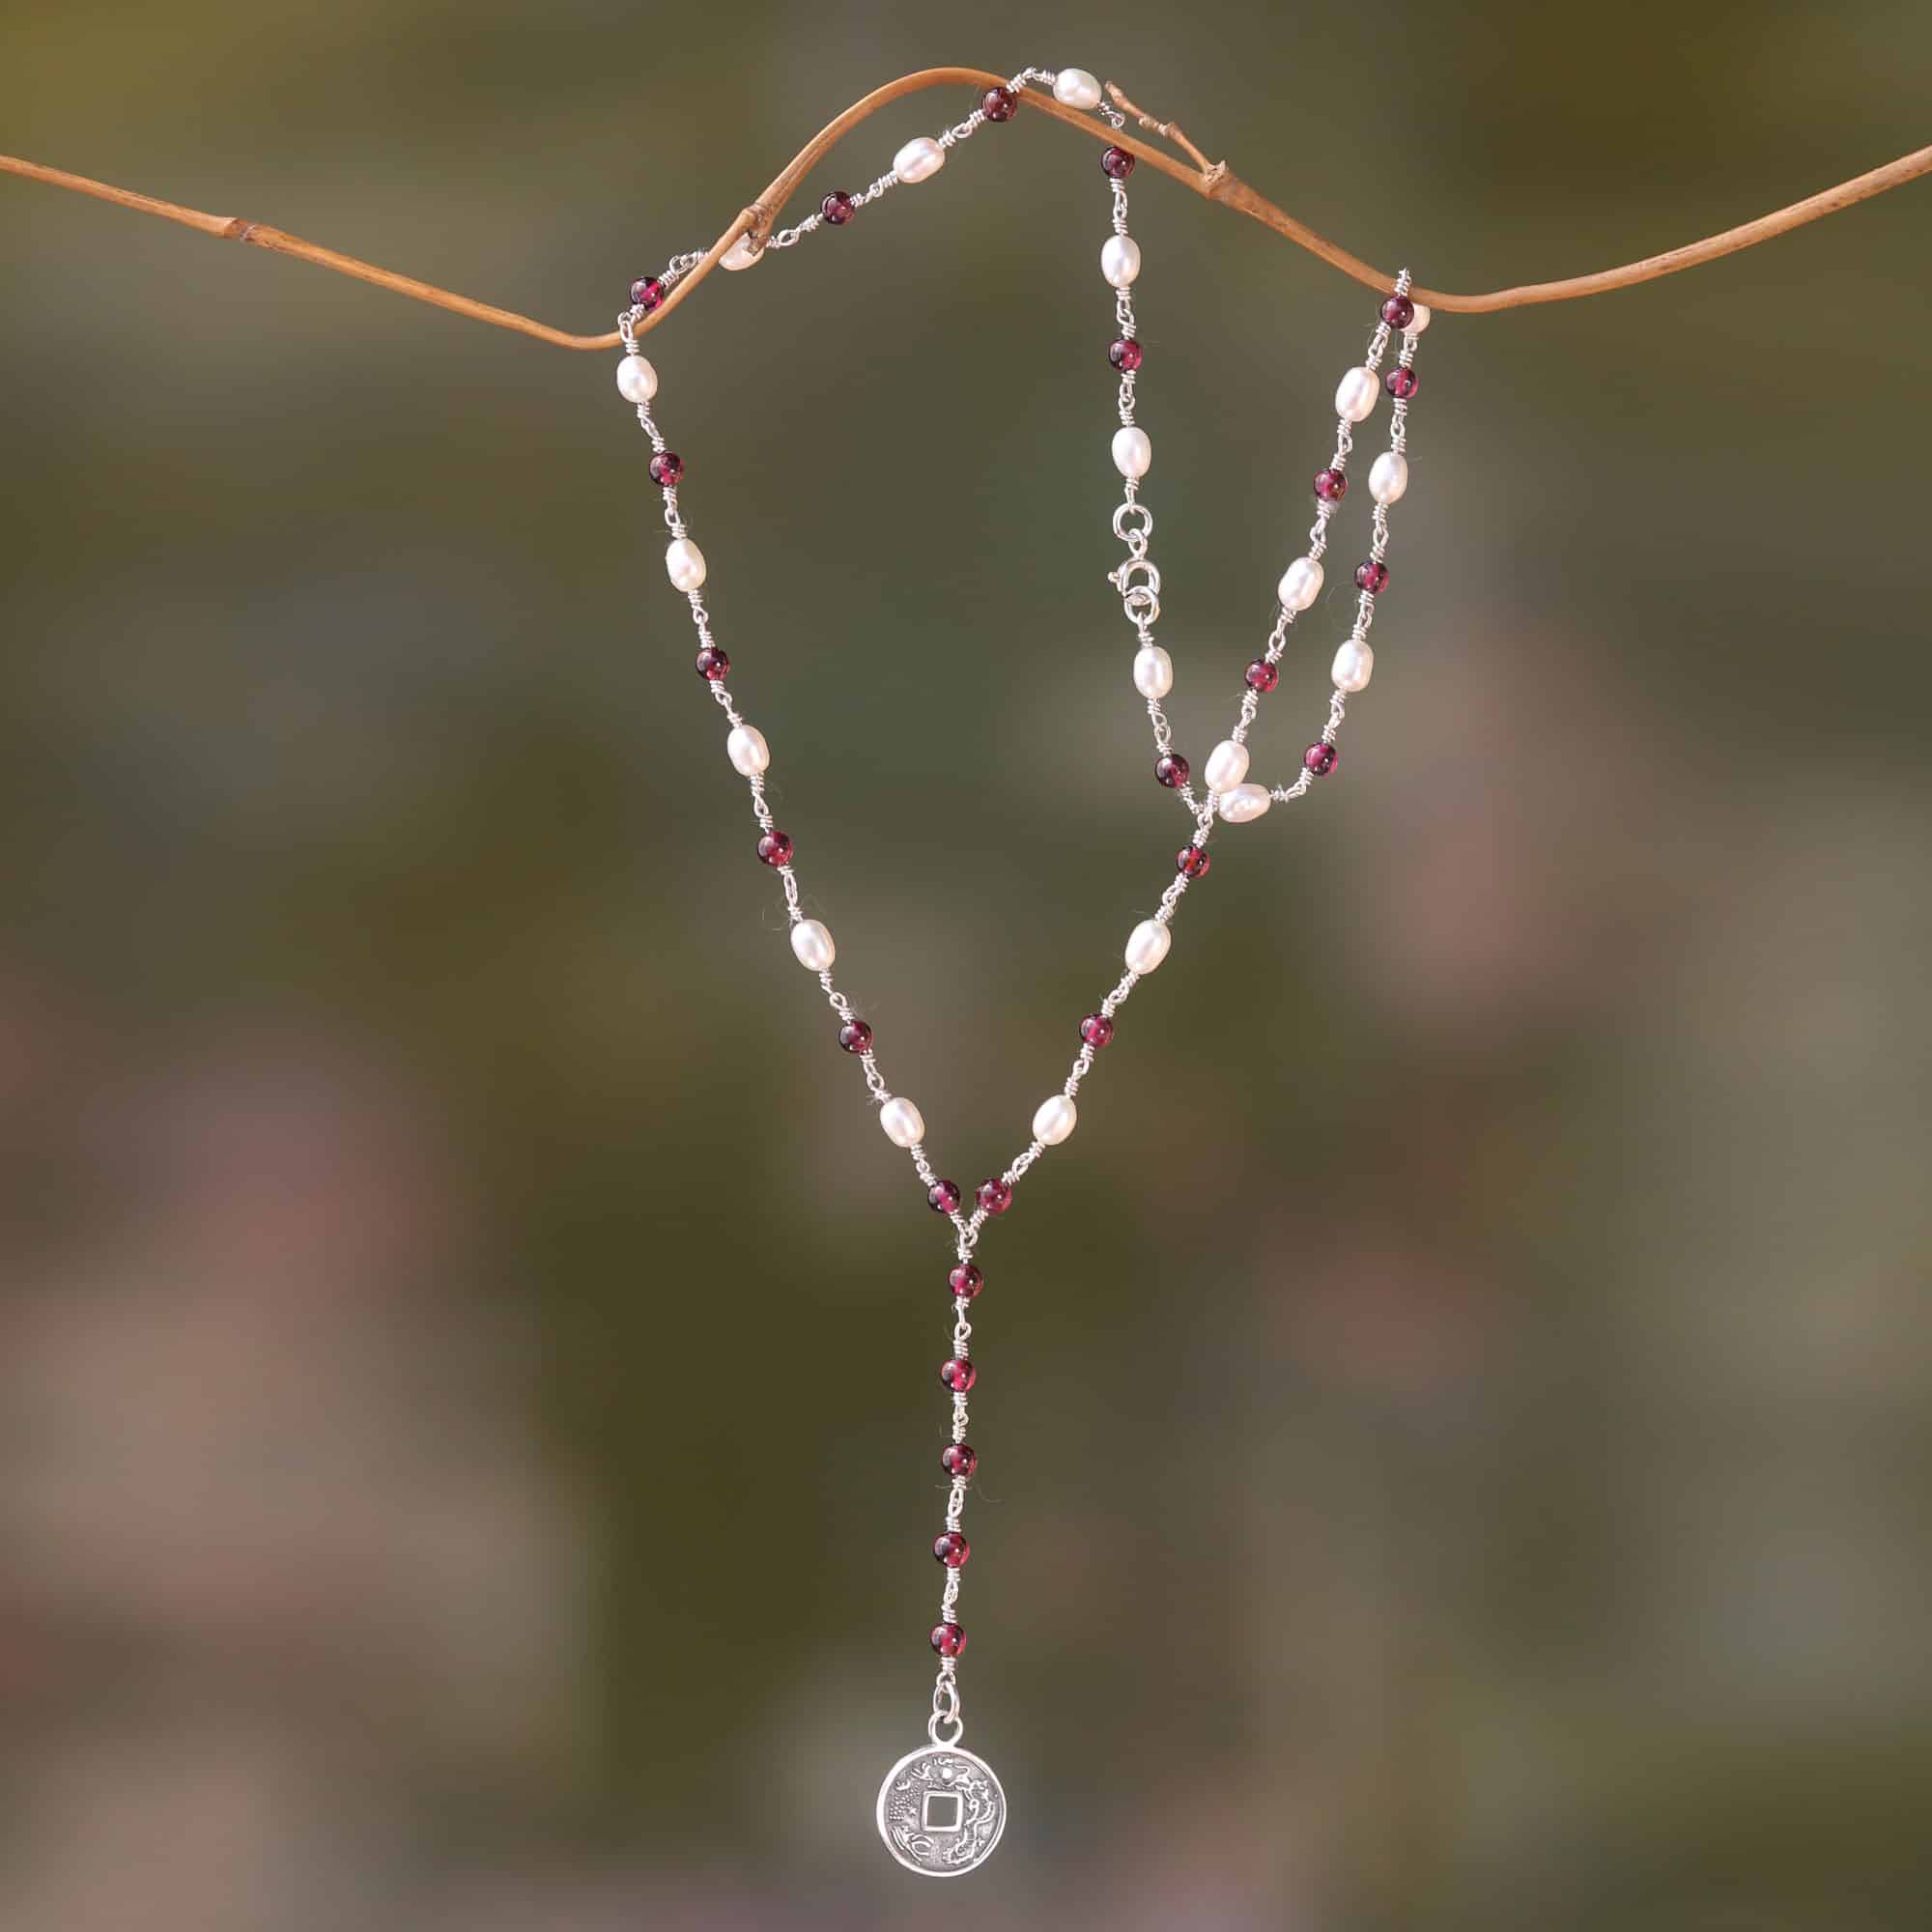 Y-Necklace with 925 Sterling Silver, Garnets and Pearls, 'Ivory and Crimson Pis Bolong'